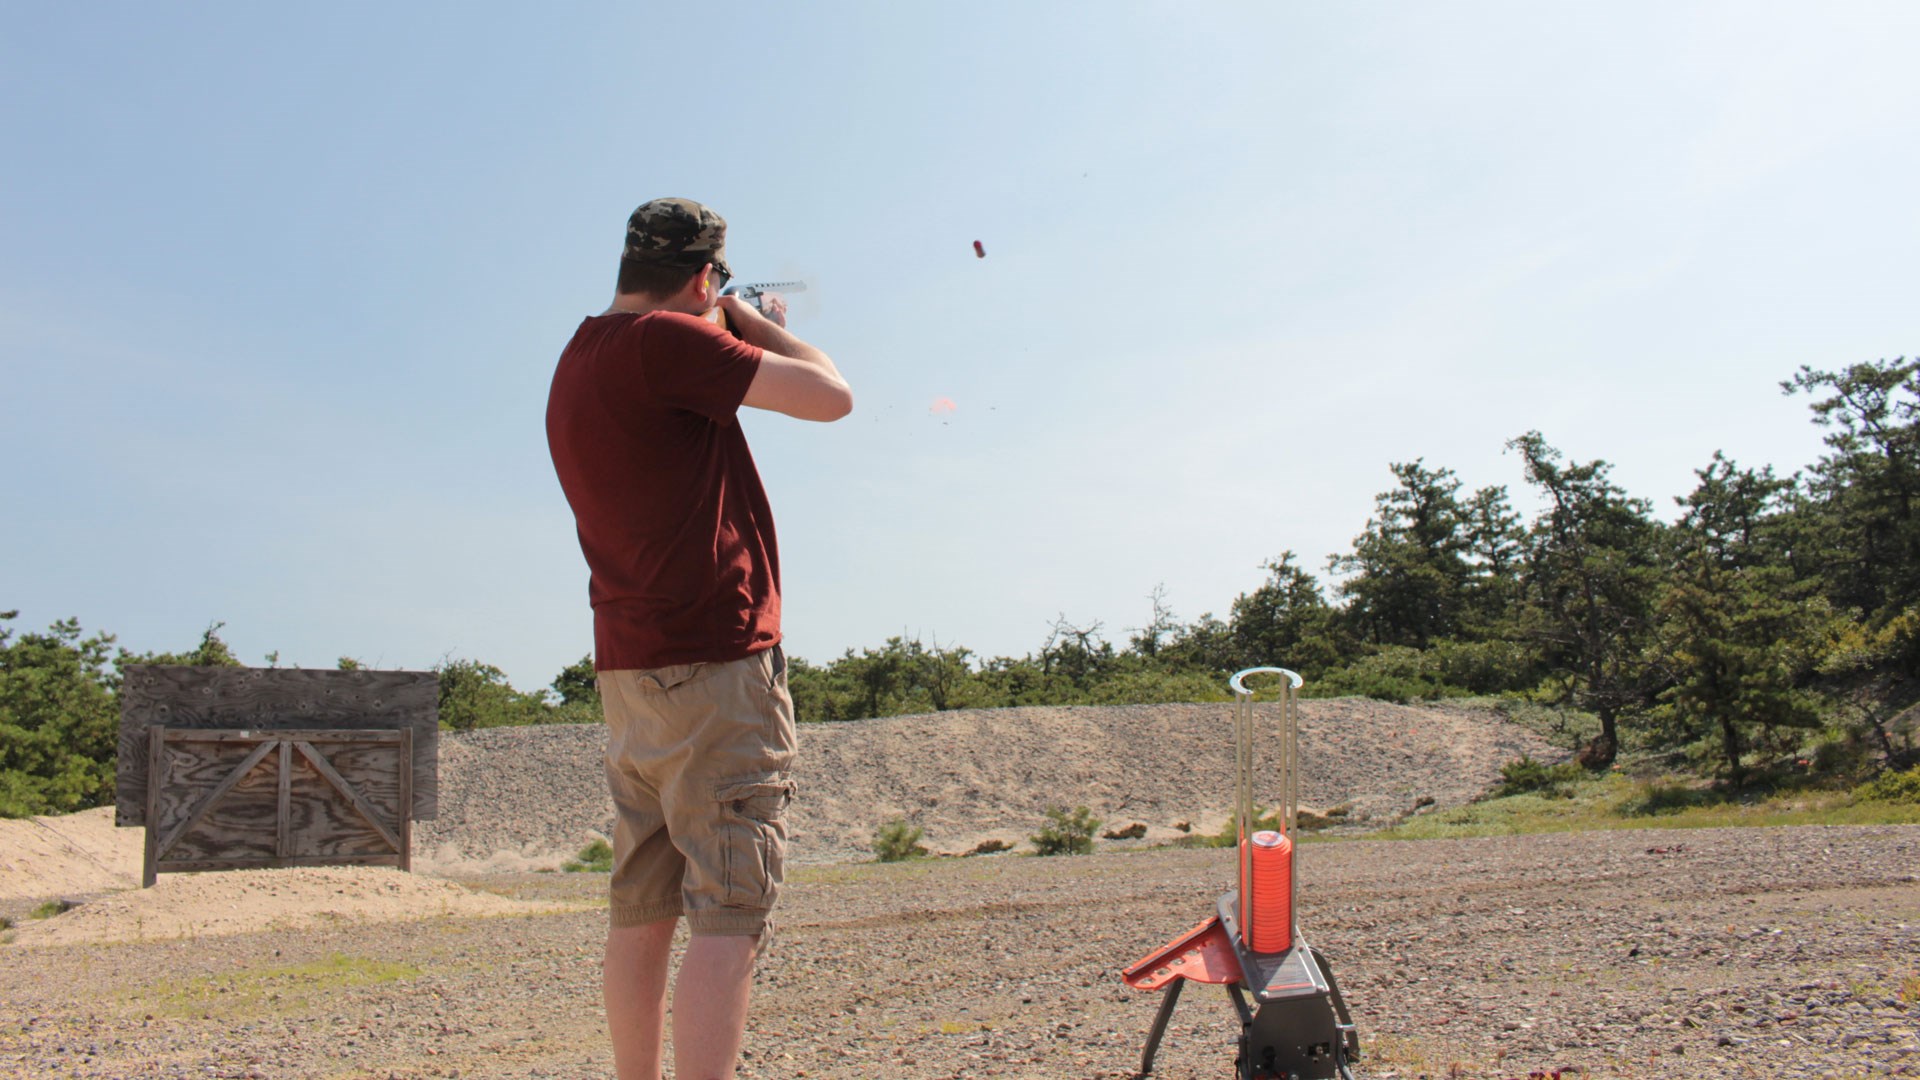 Man standing outdoors facing away from camera holding shooting shotgun with clay target machine blue sky dirt hill trees